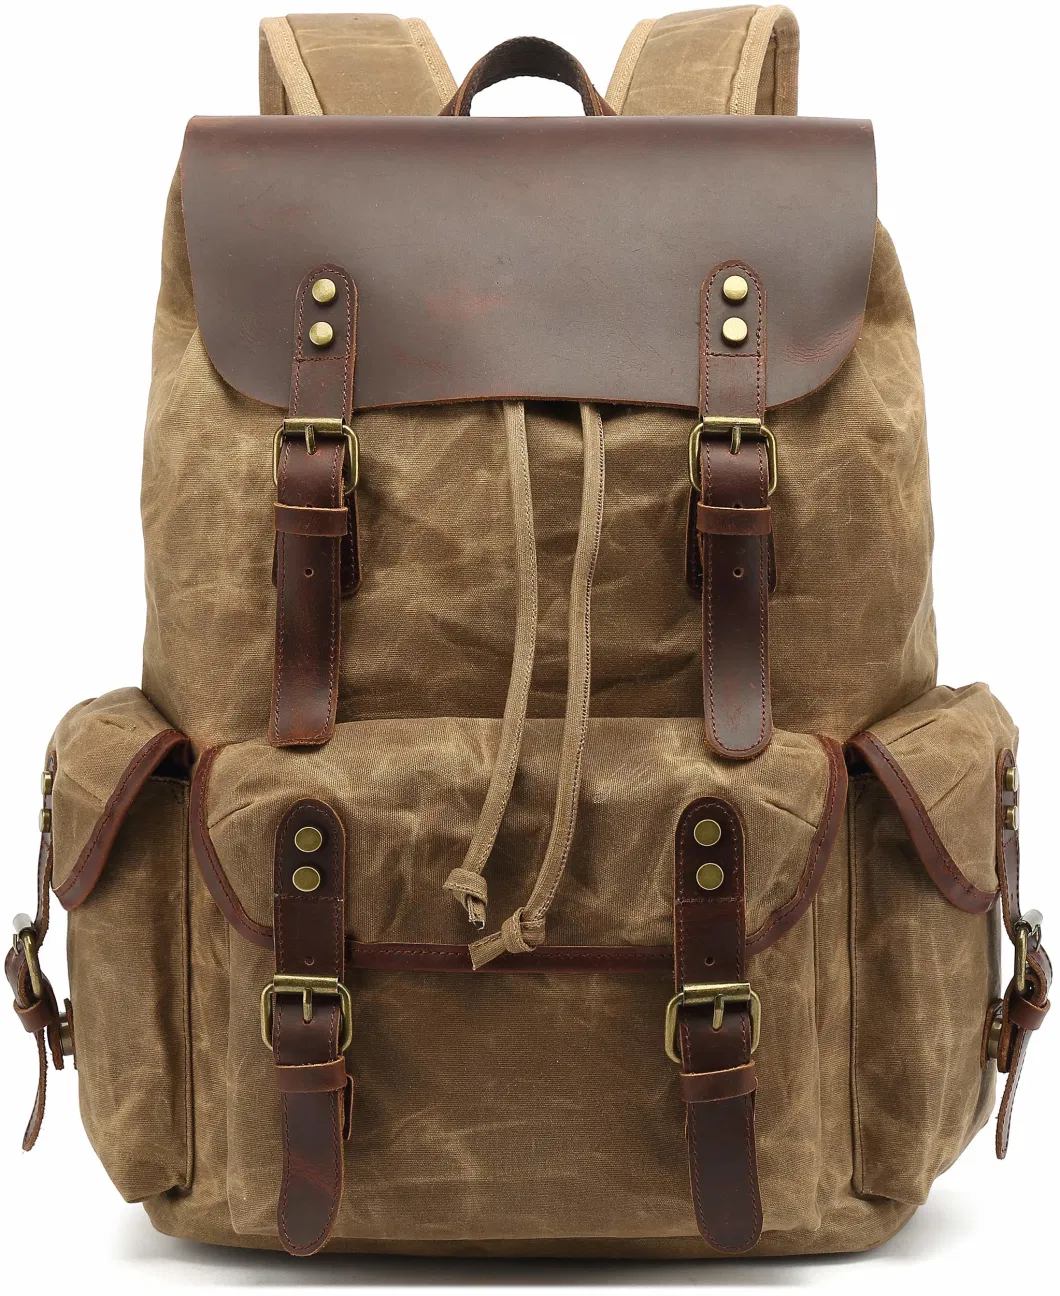 Drawstring Waxed Canvas Backpack Men Prime S Retro Cowhide Leather Travel Backpack (RSMC-6105-Z)